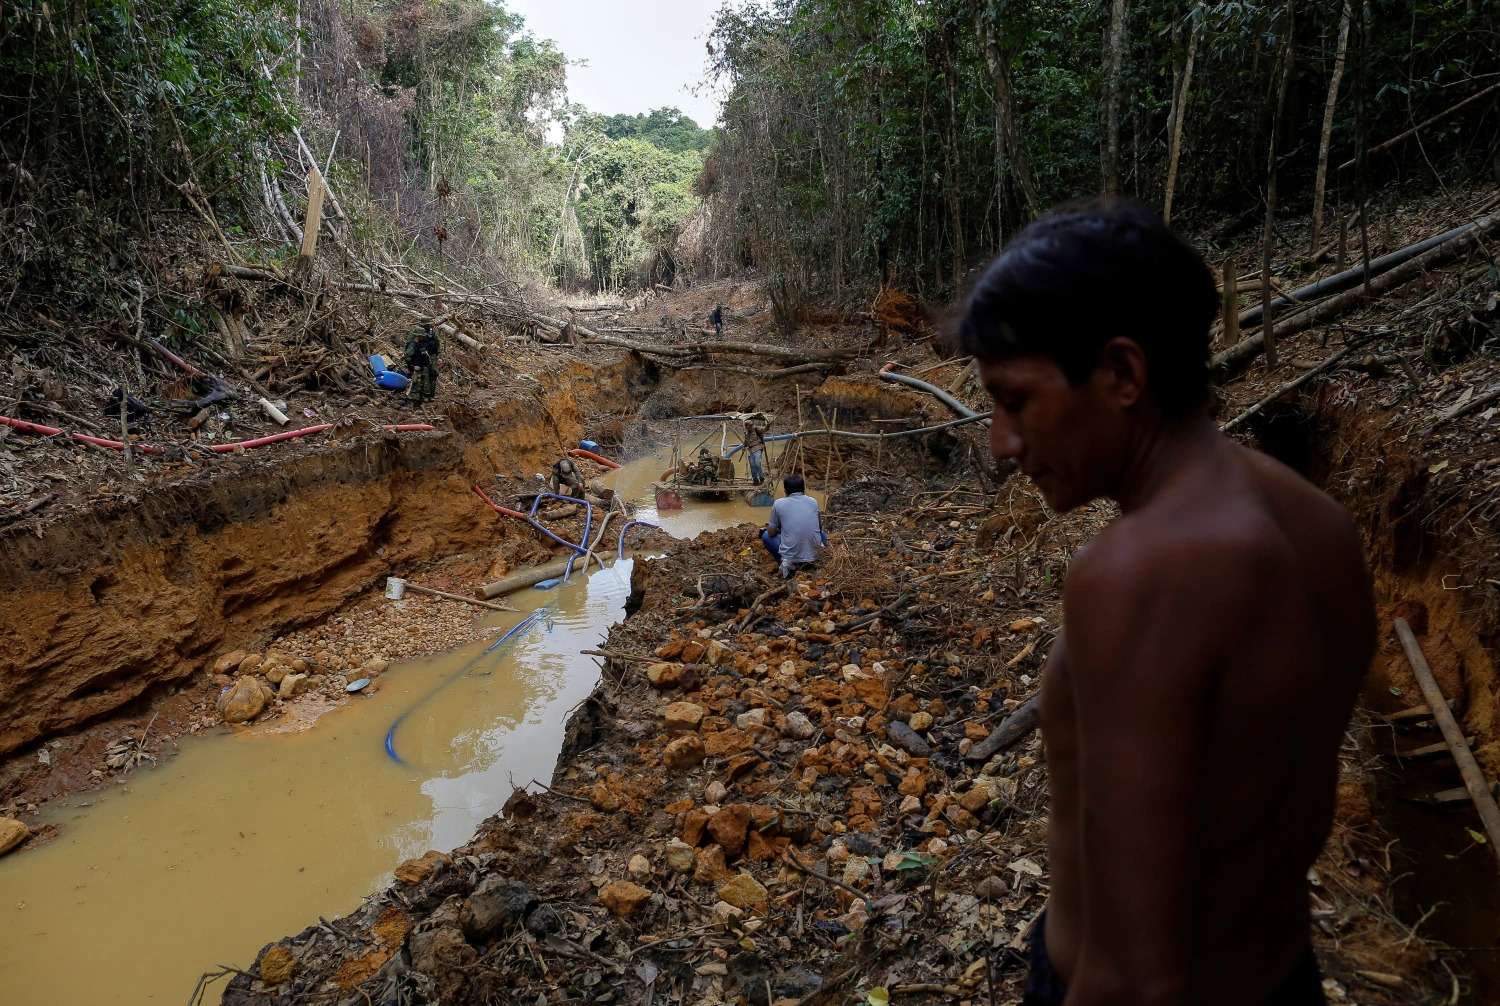 The extraction of earth's materials and minerals (especially natural resources like rocks, soil and water), whether on or near indigenous land, is harmful to the environment and public health. 